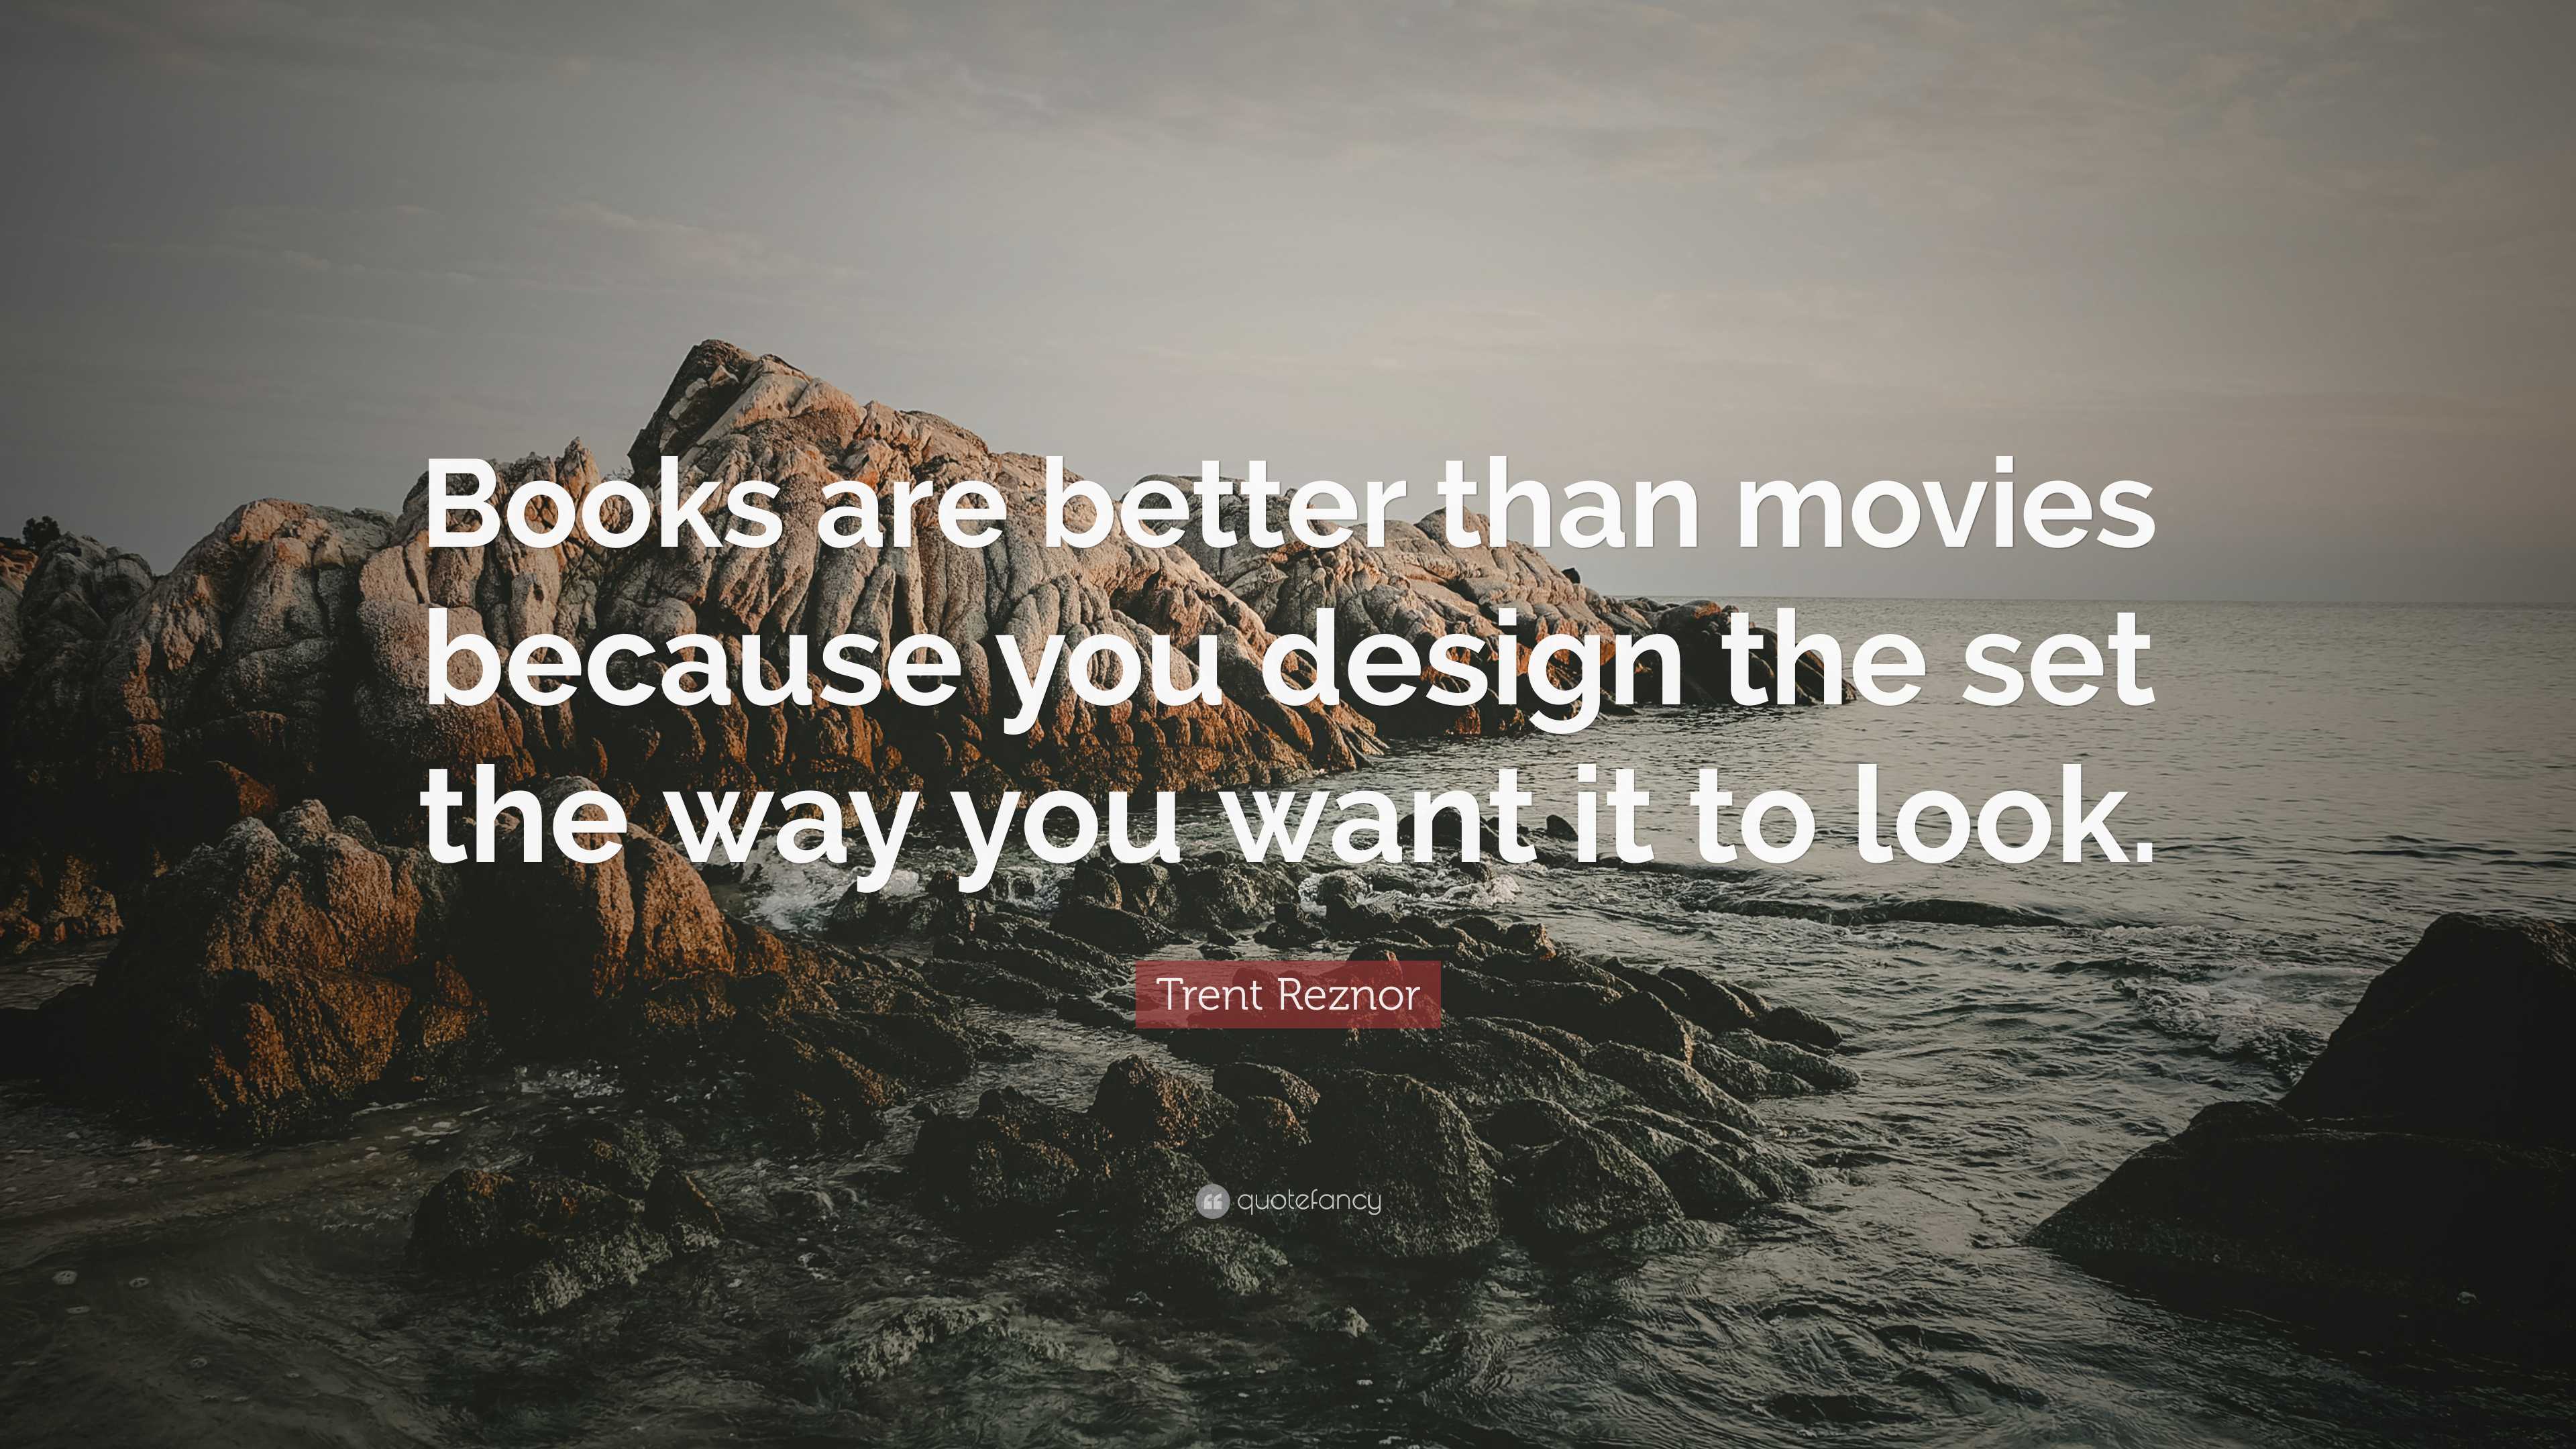 Trent Reznor Quote: “Books are better than movies because you design the  set the way you